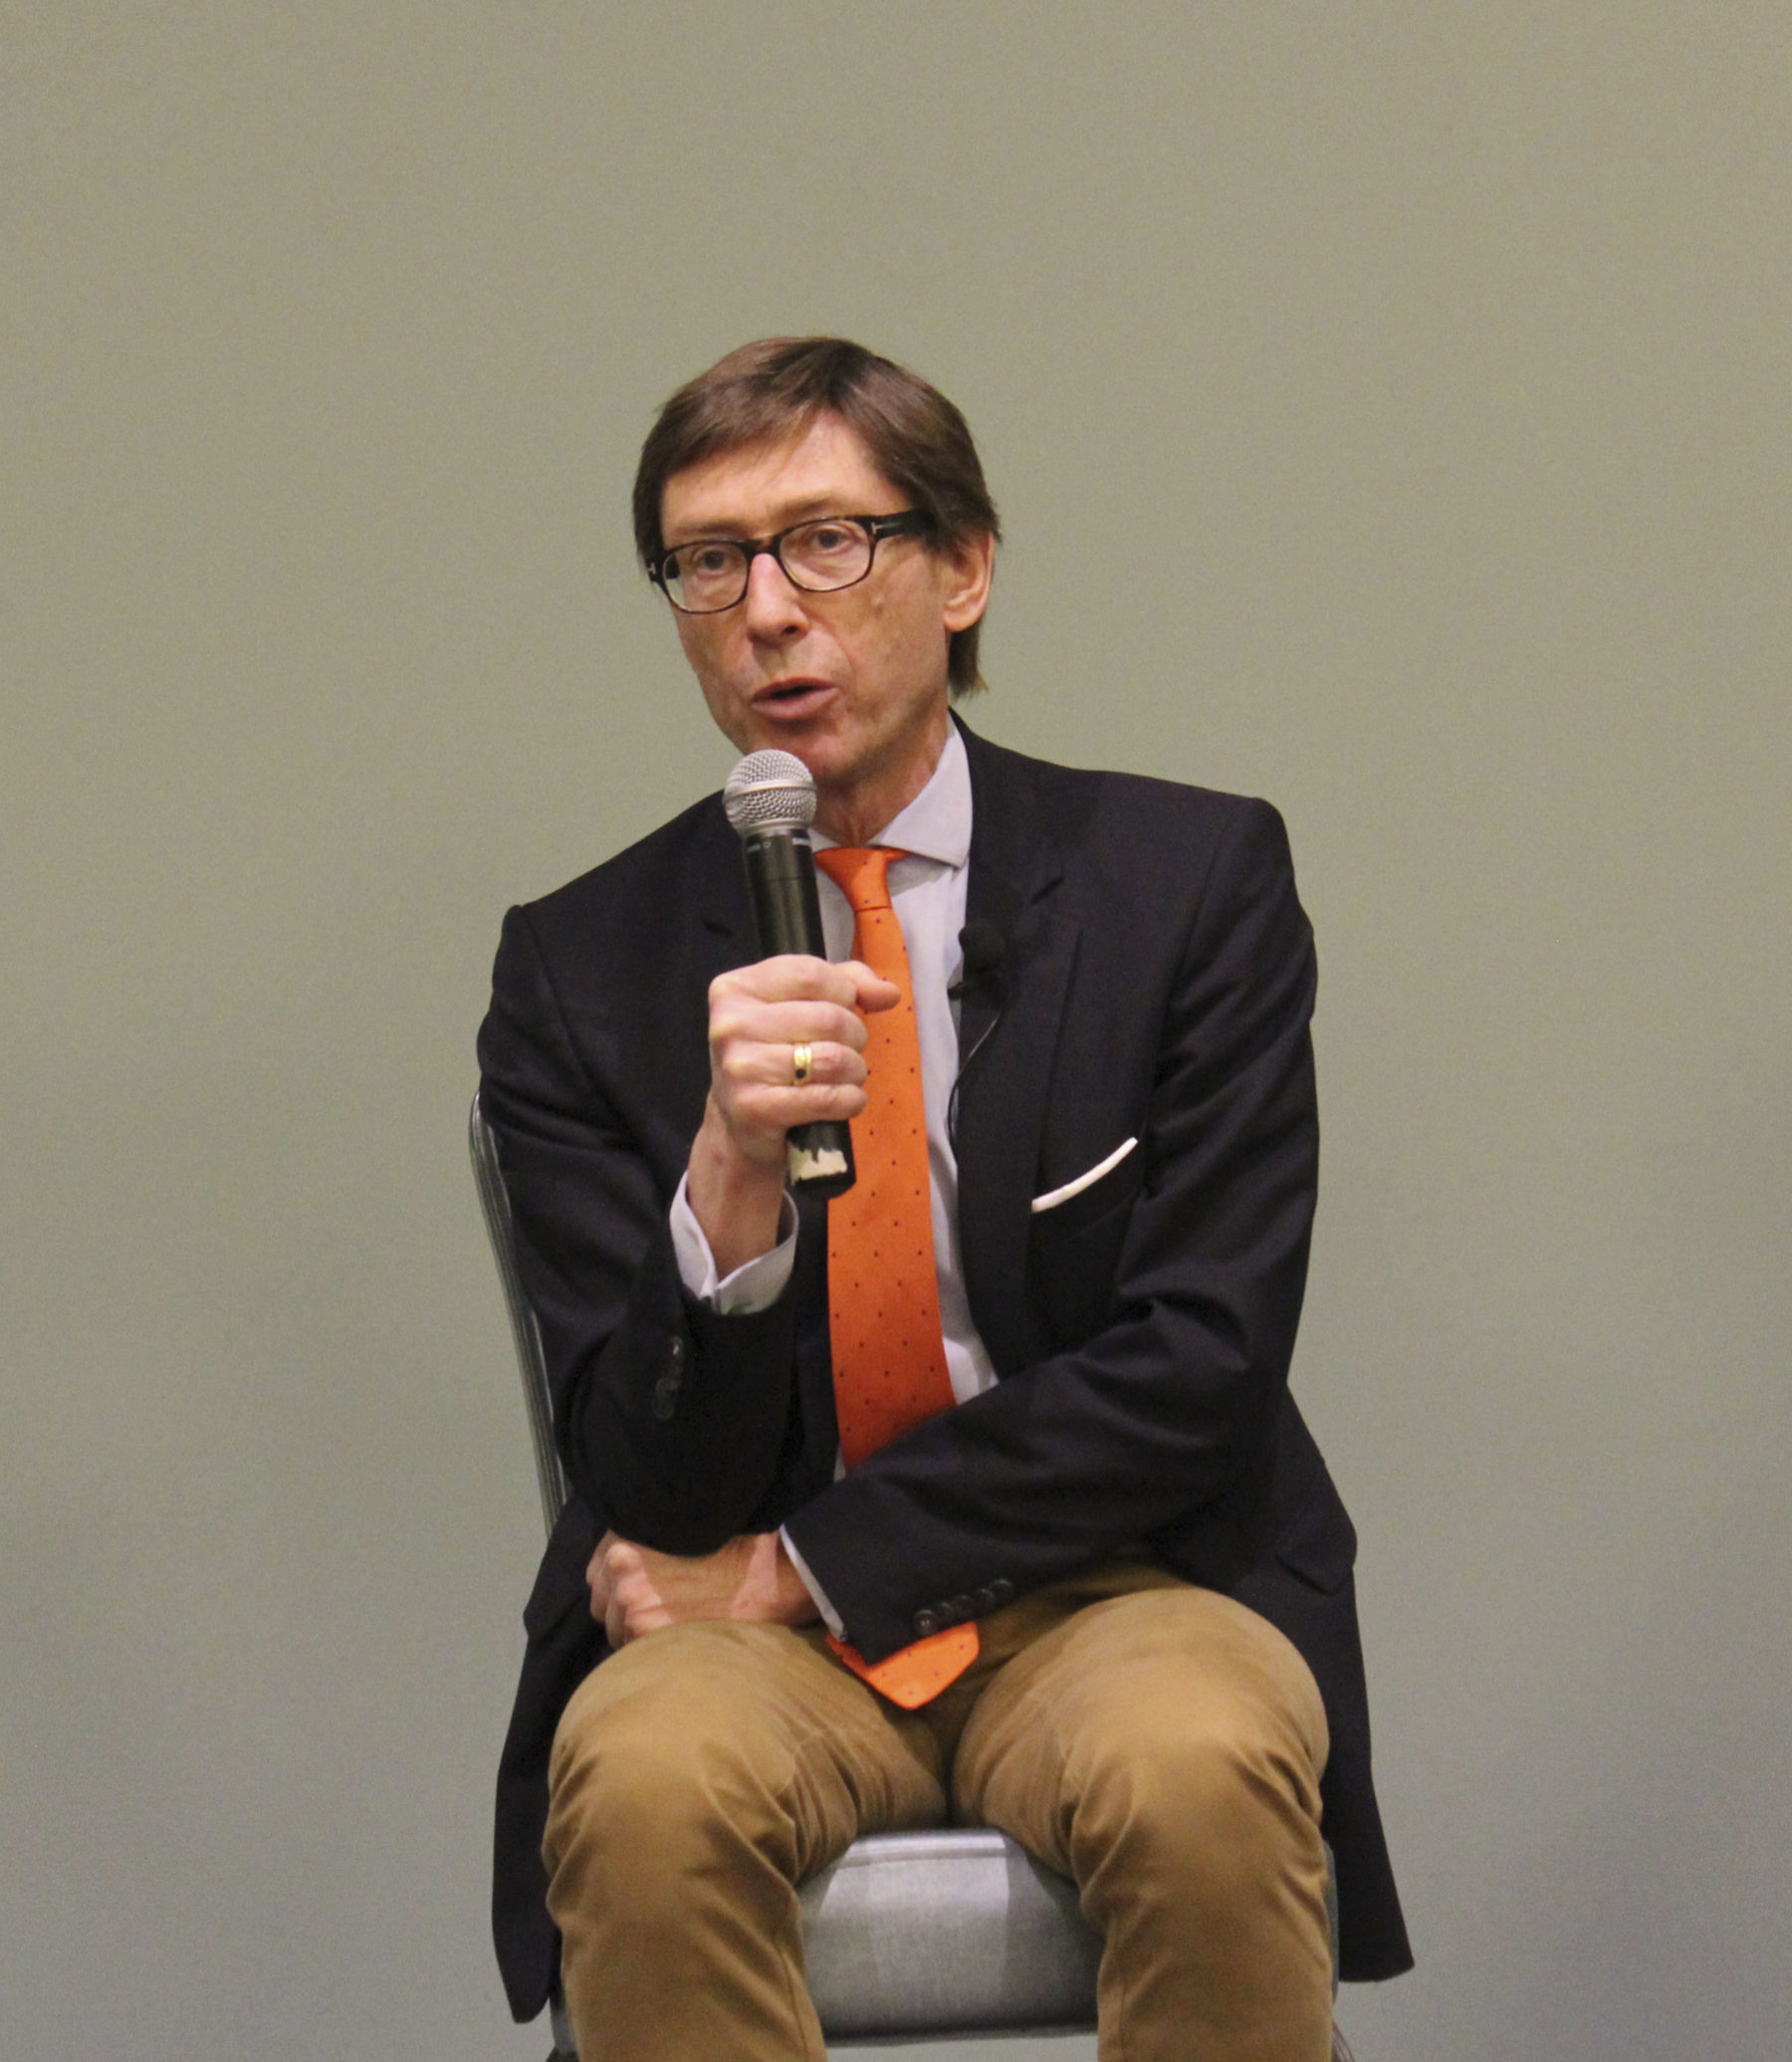 Ambassador Peter Wittig talks about how the West should approach Russia during the public event in Tampa, Florida 